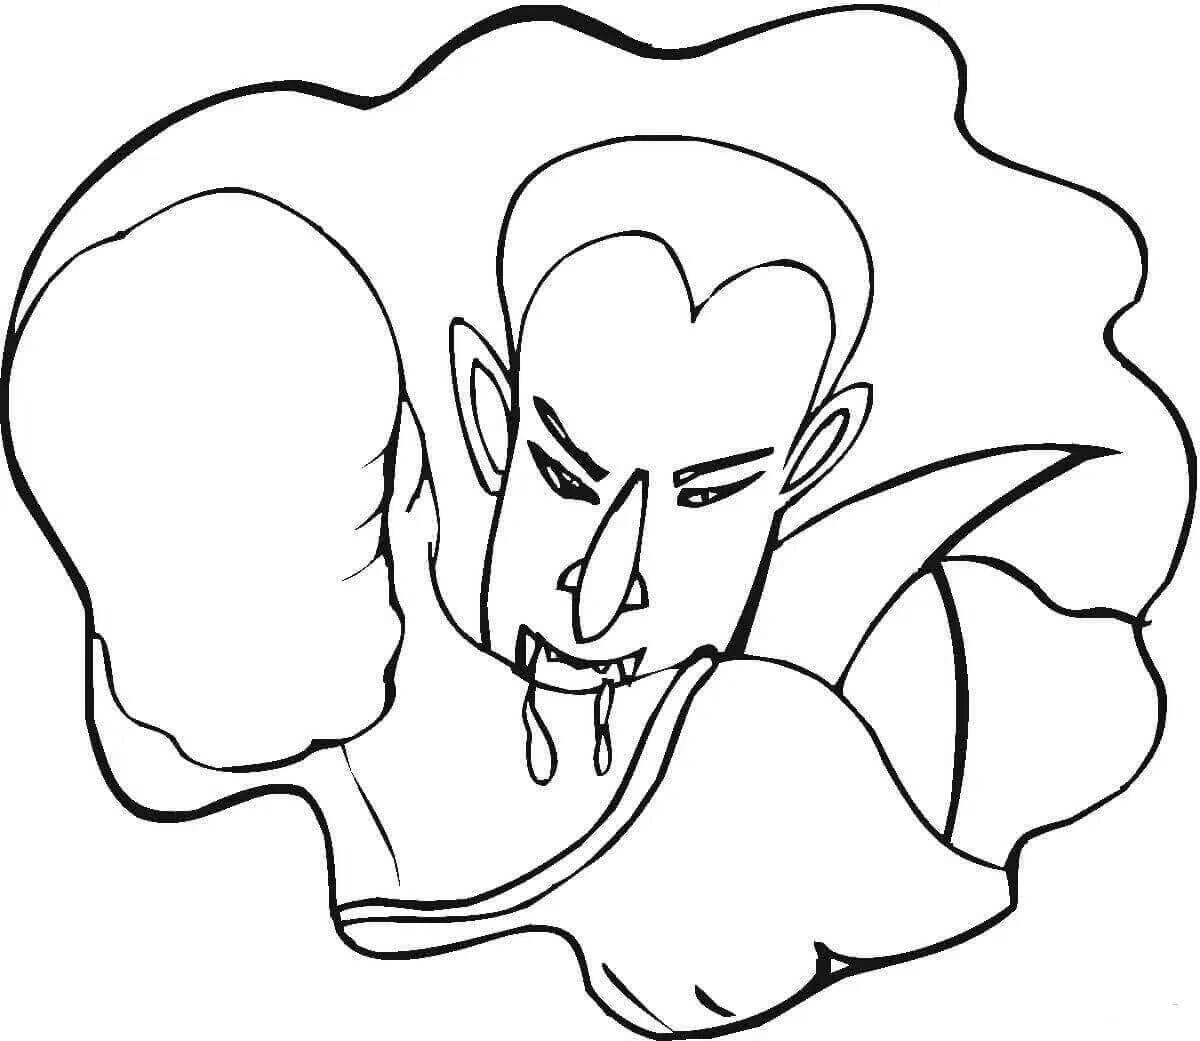 Sinister vampire coloring book for kids